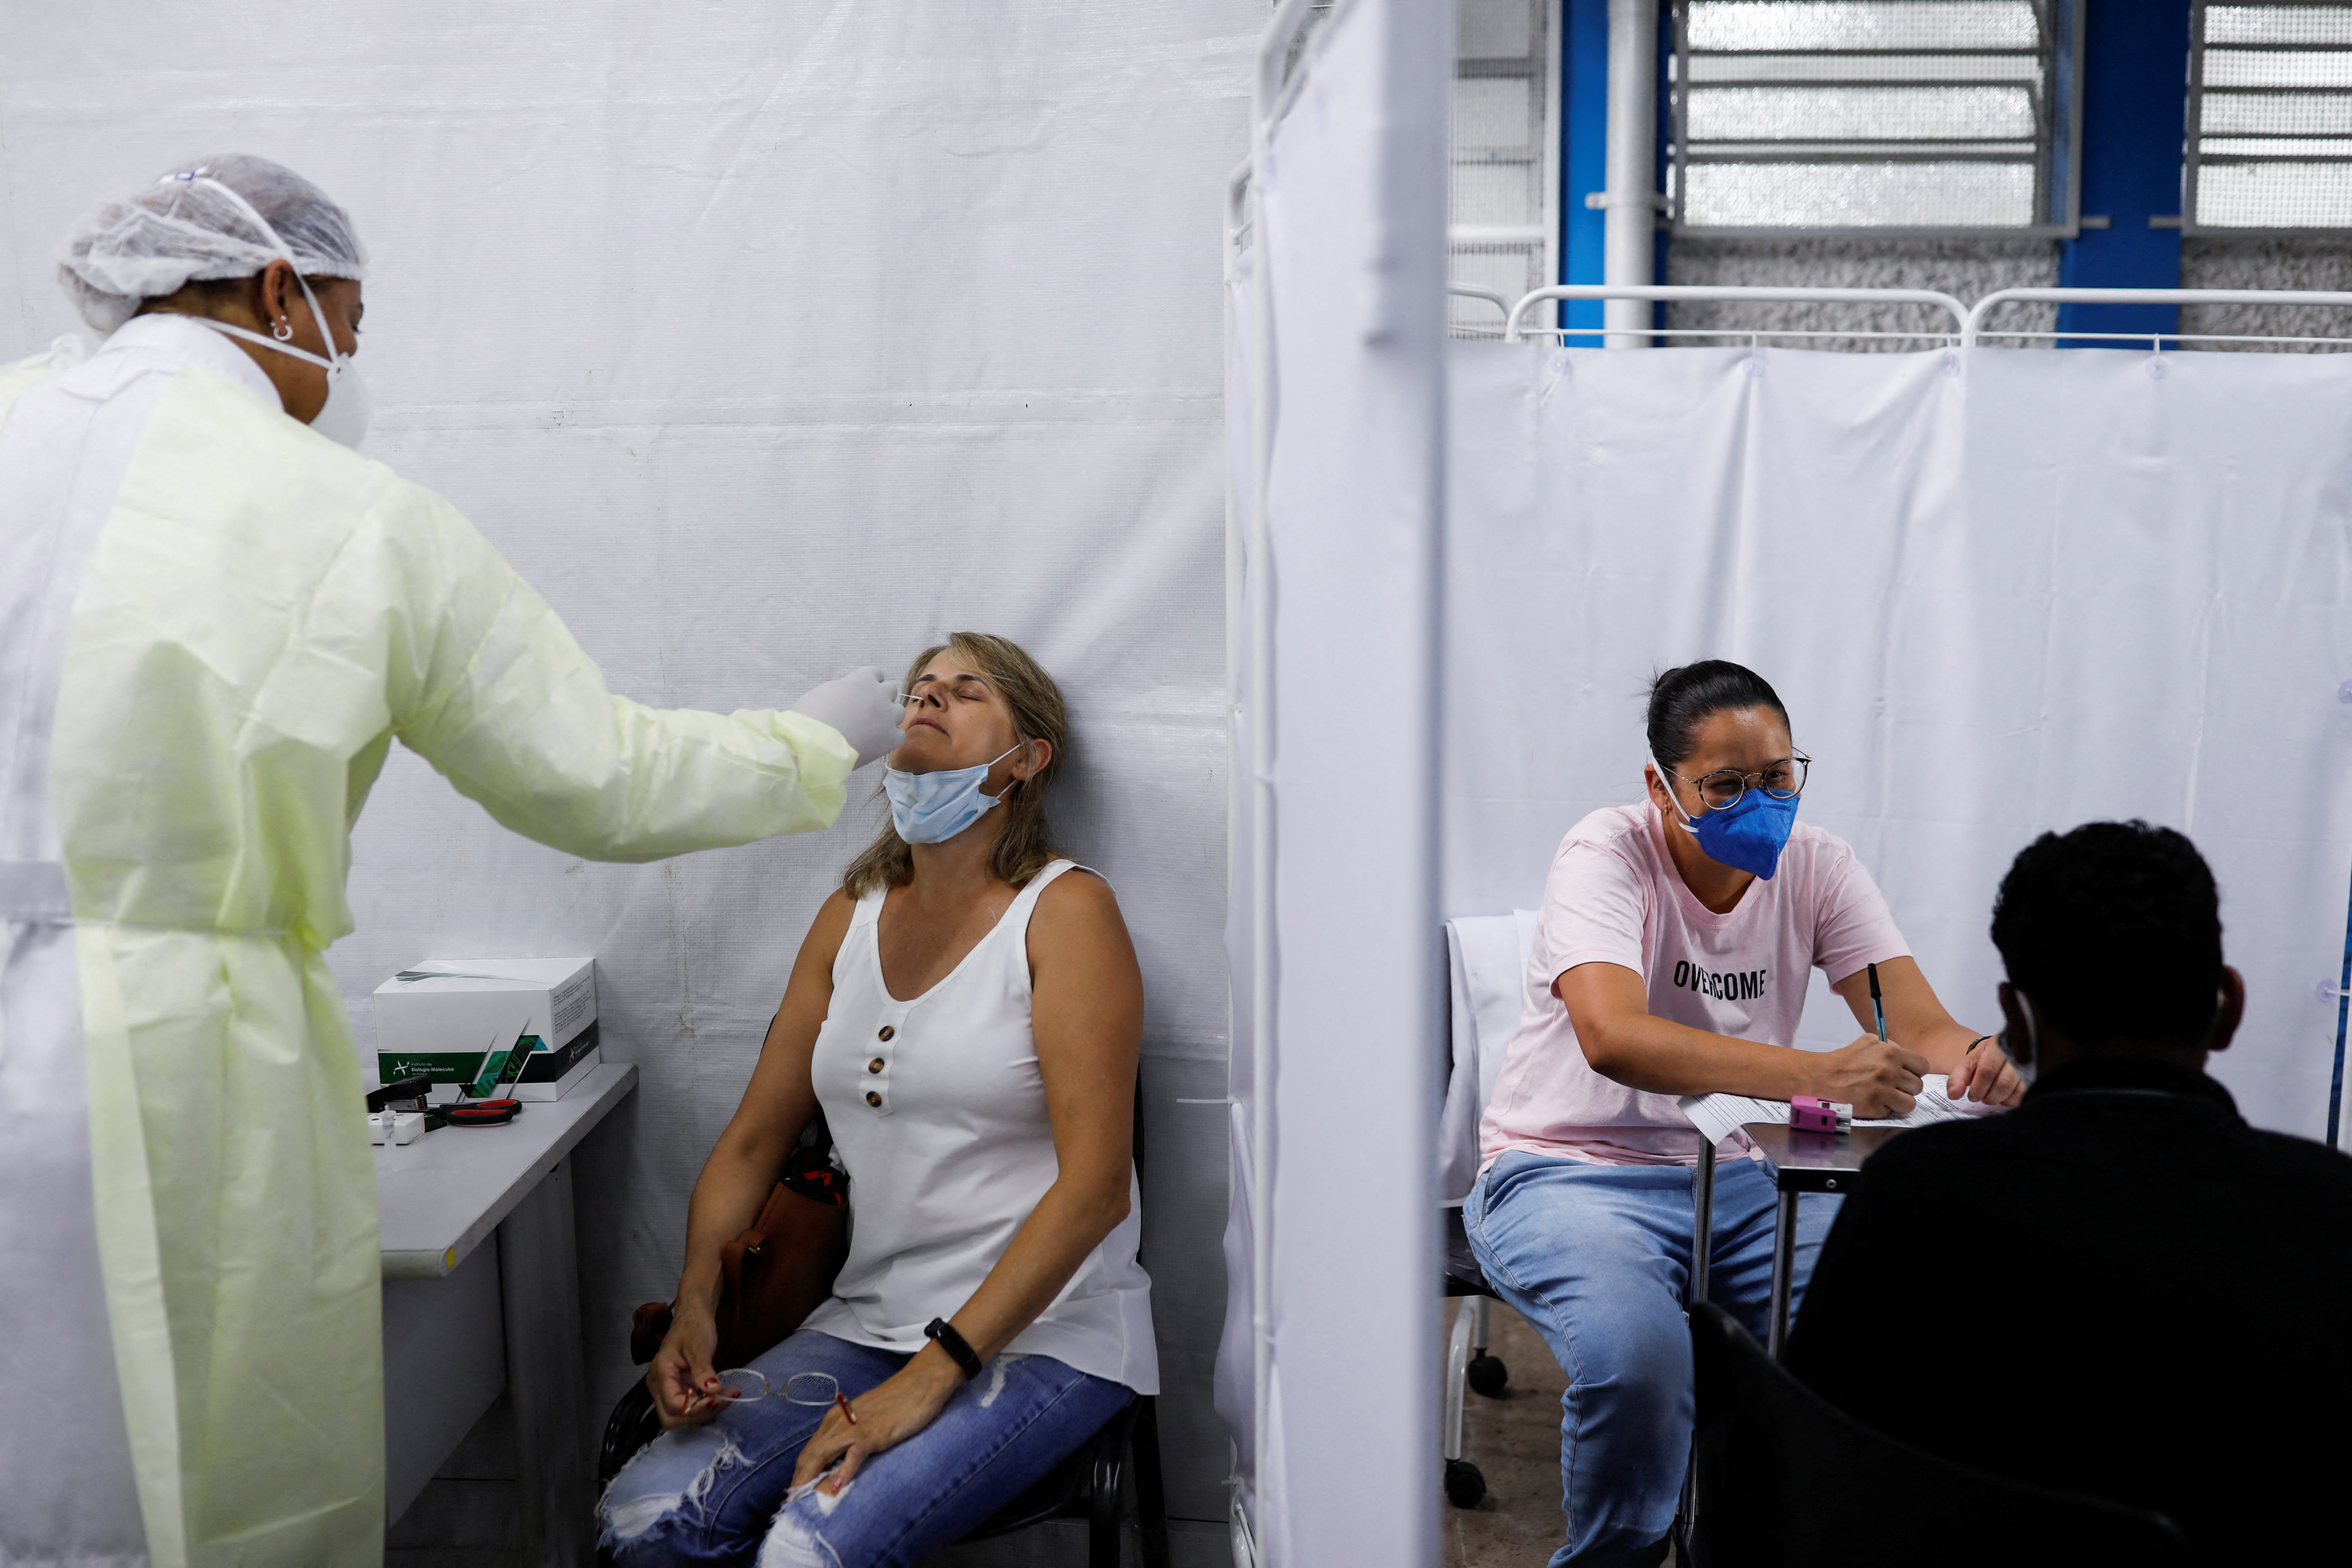 A woman gets tested by a health worker for the coronavirus disease (COVID-19) at the Basic Health Unit in Sao Paulo, Brazil January 6, 2022. REUTERS/Amanda Perobelli